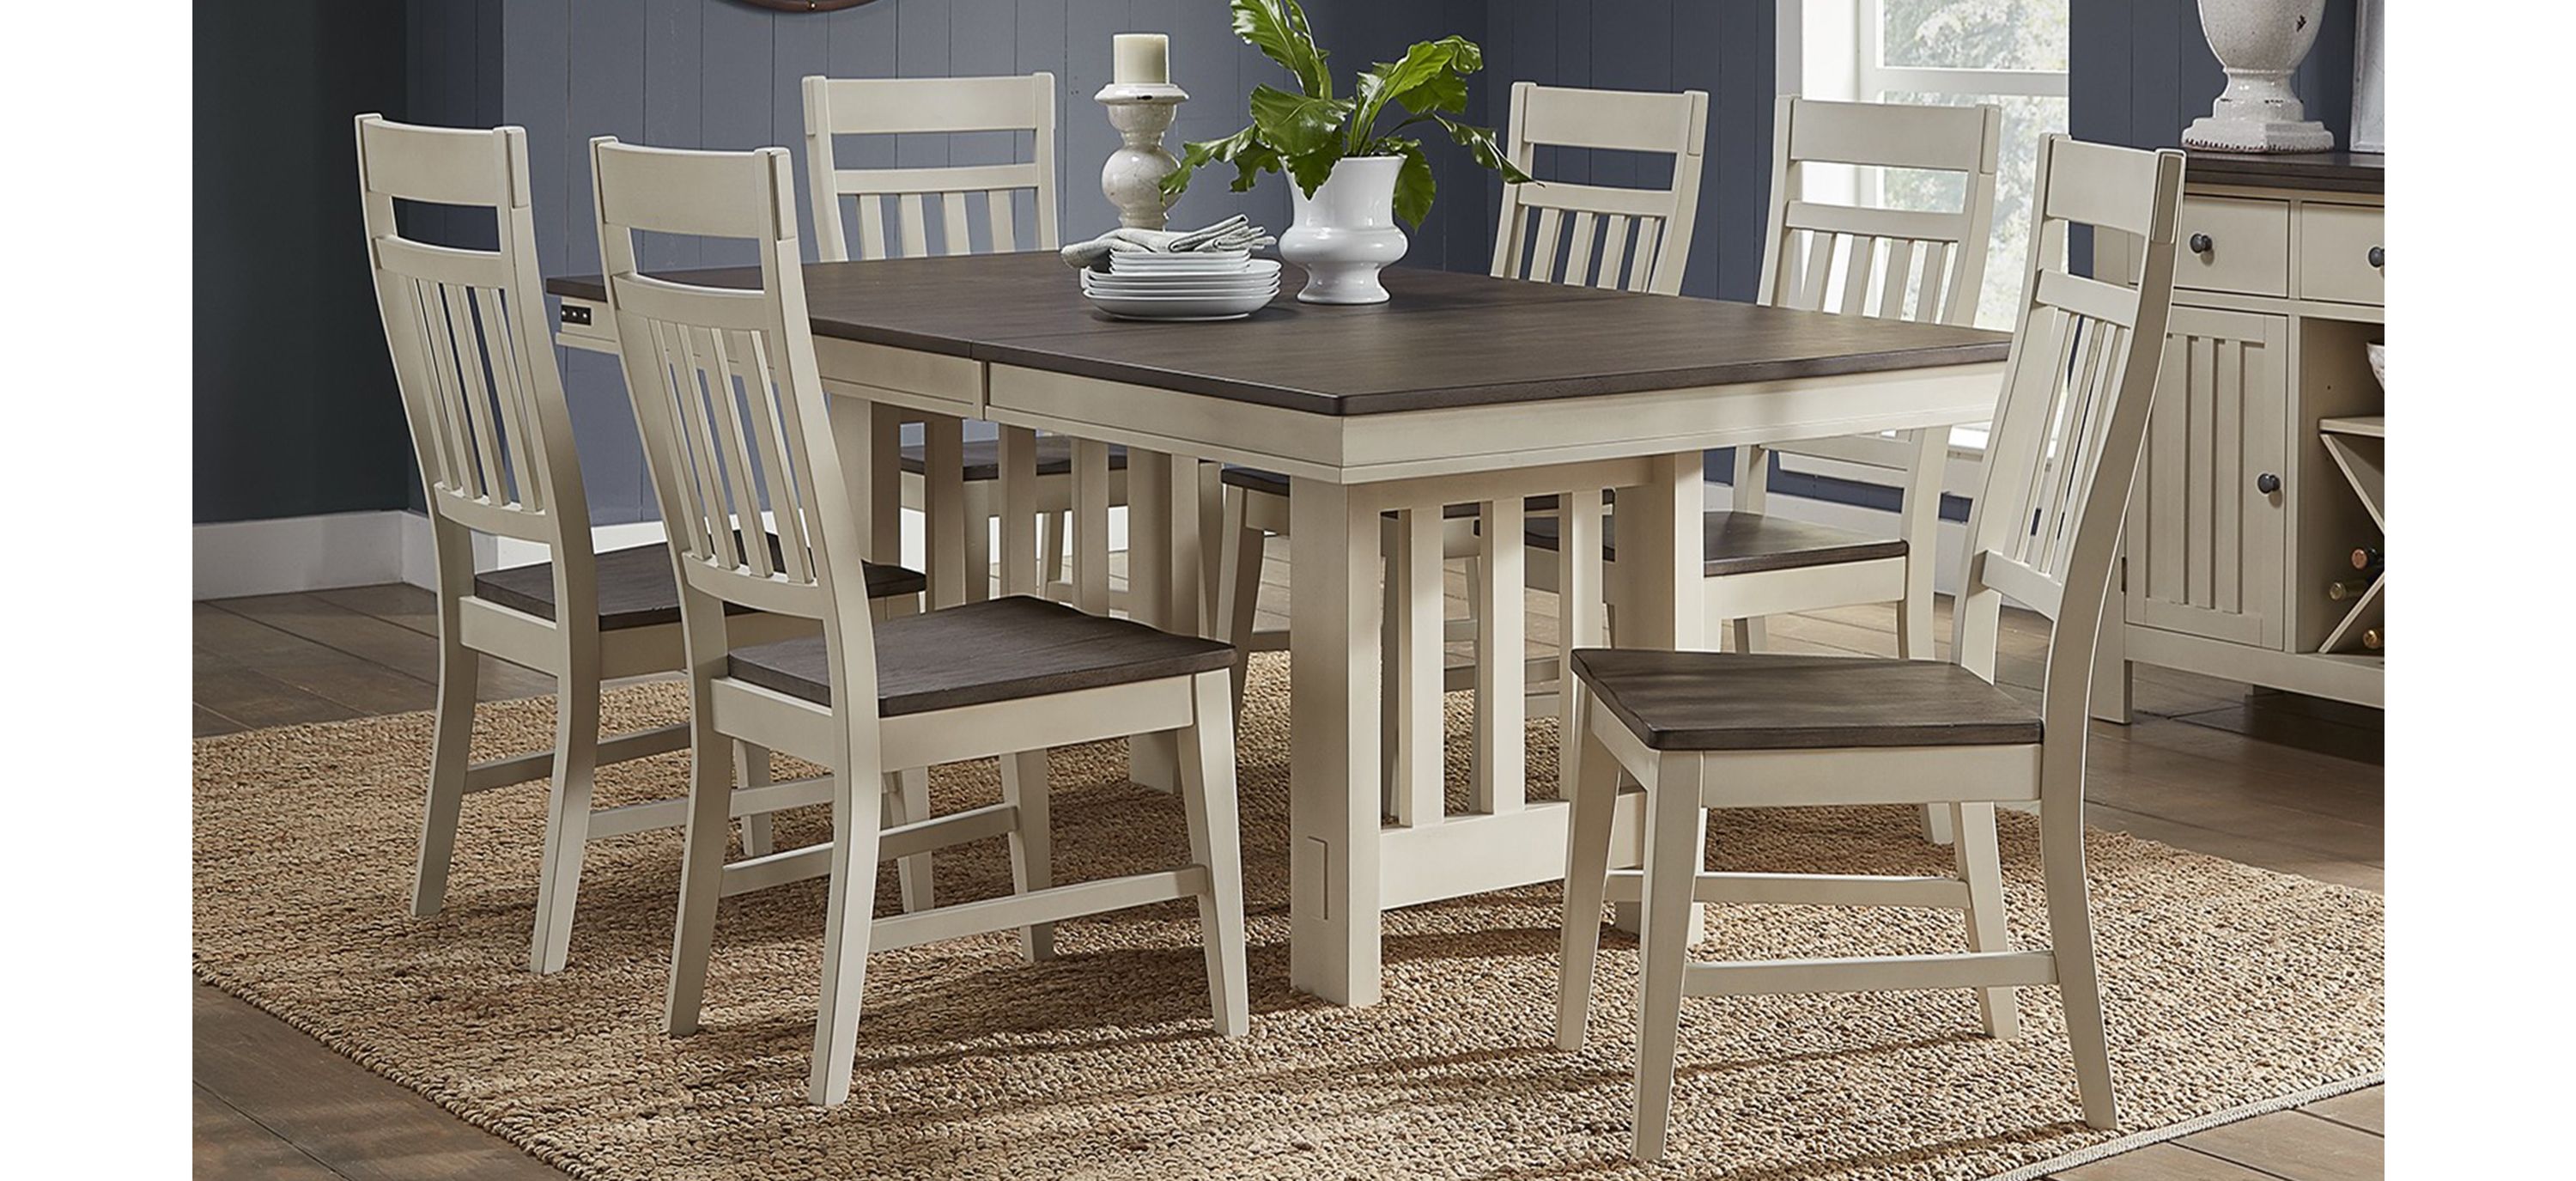 Bremerton 7-pc. Rectangular Dining Set with Butterfly Leaf